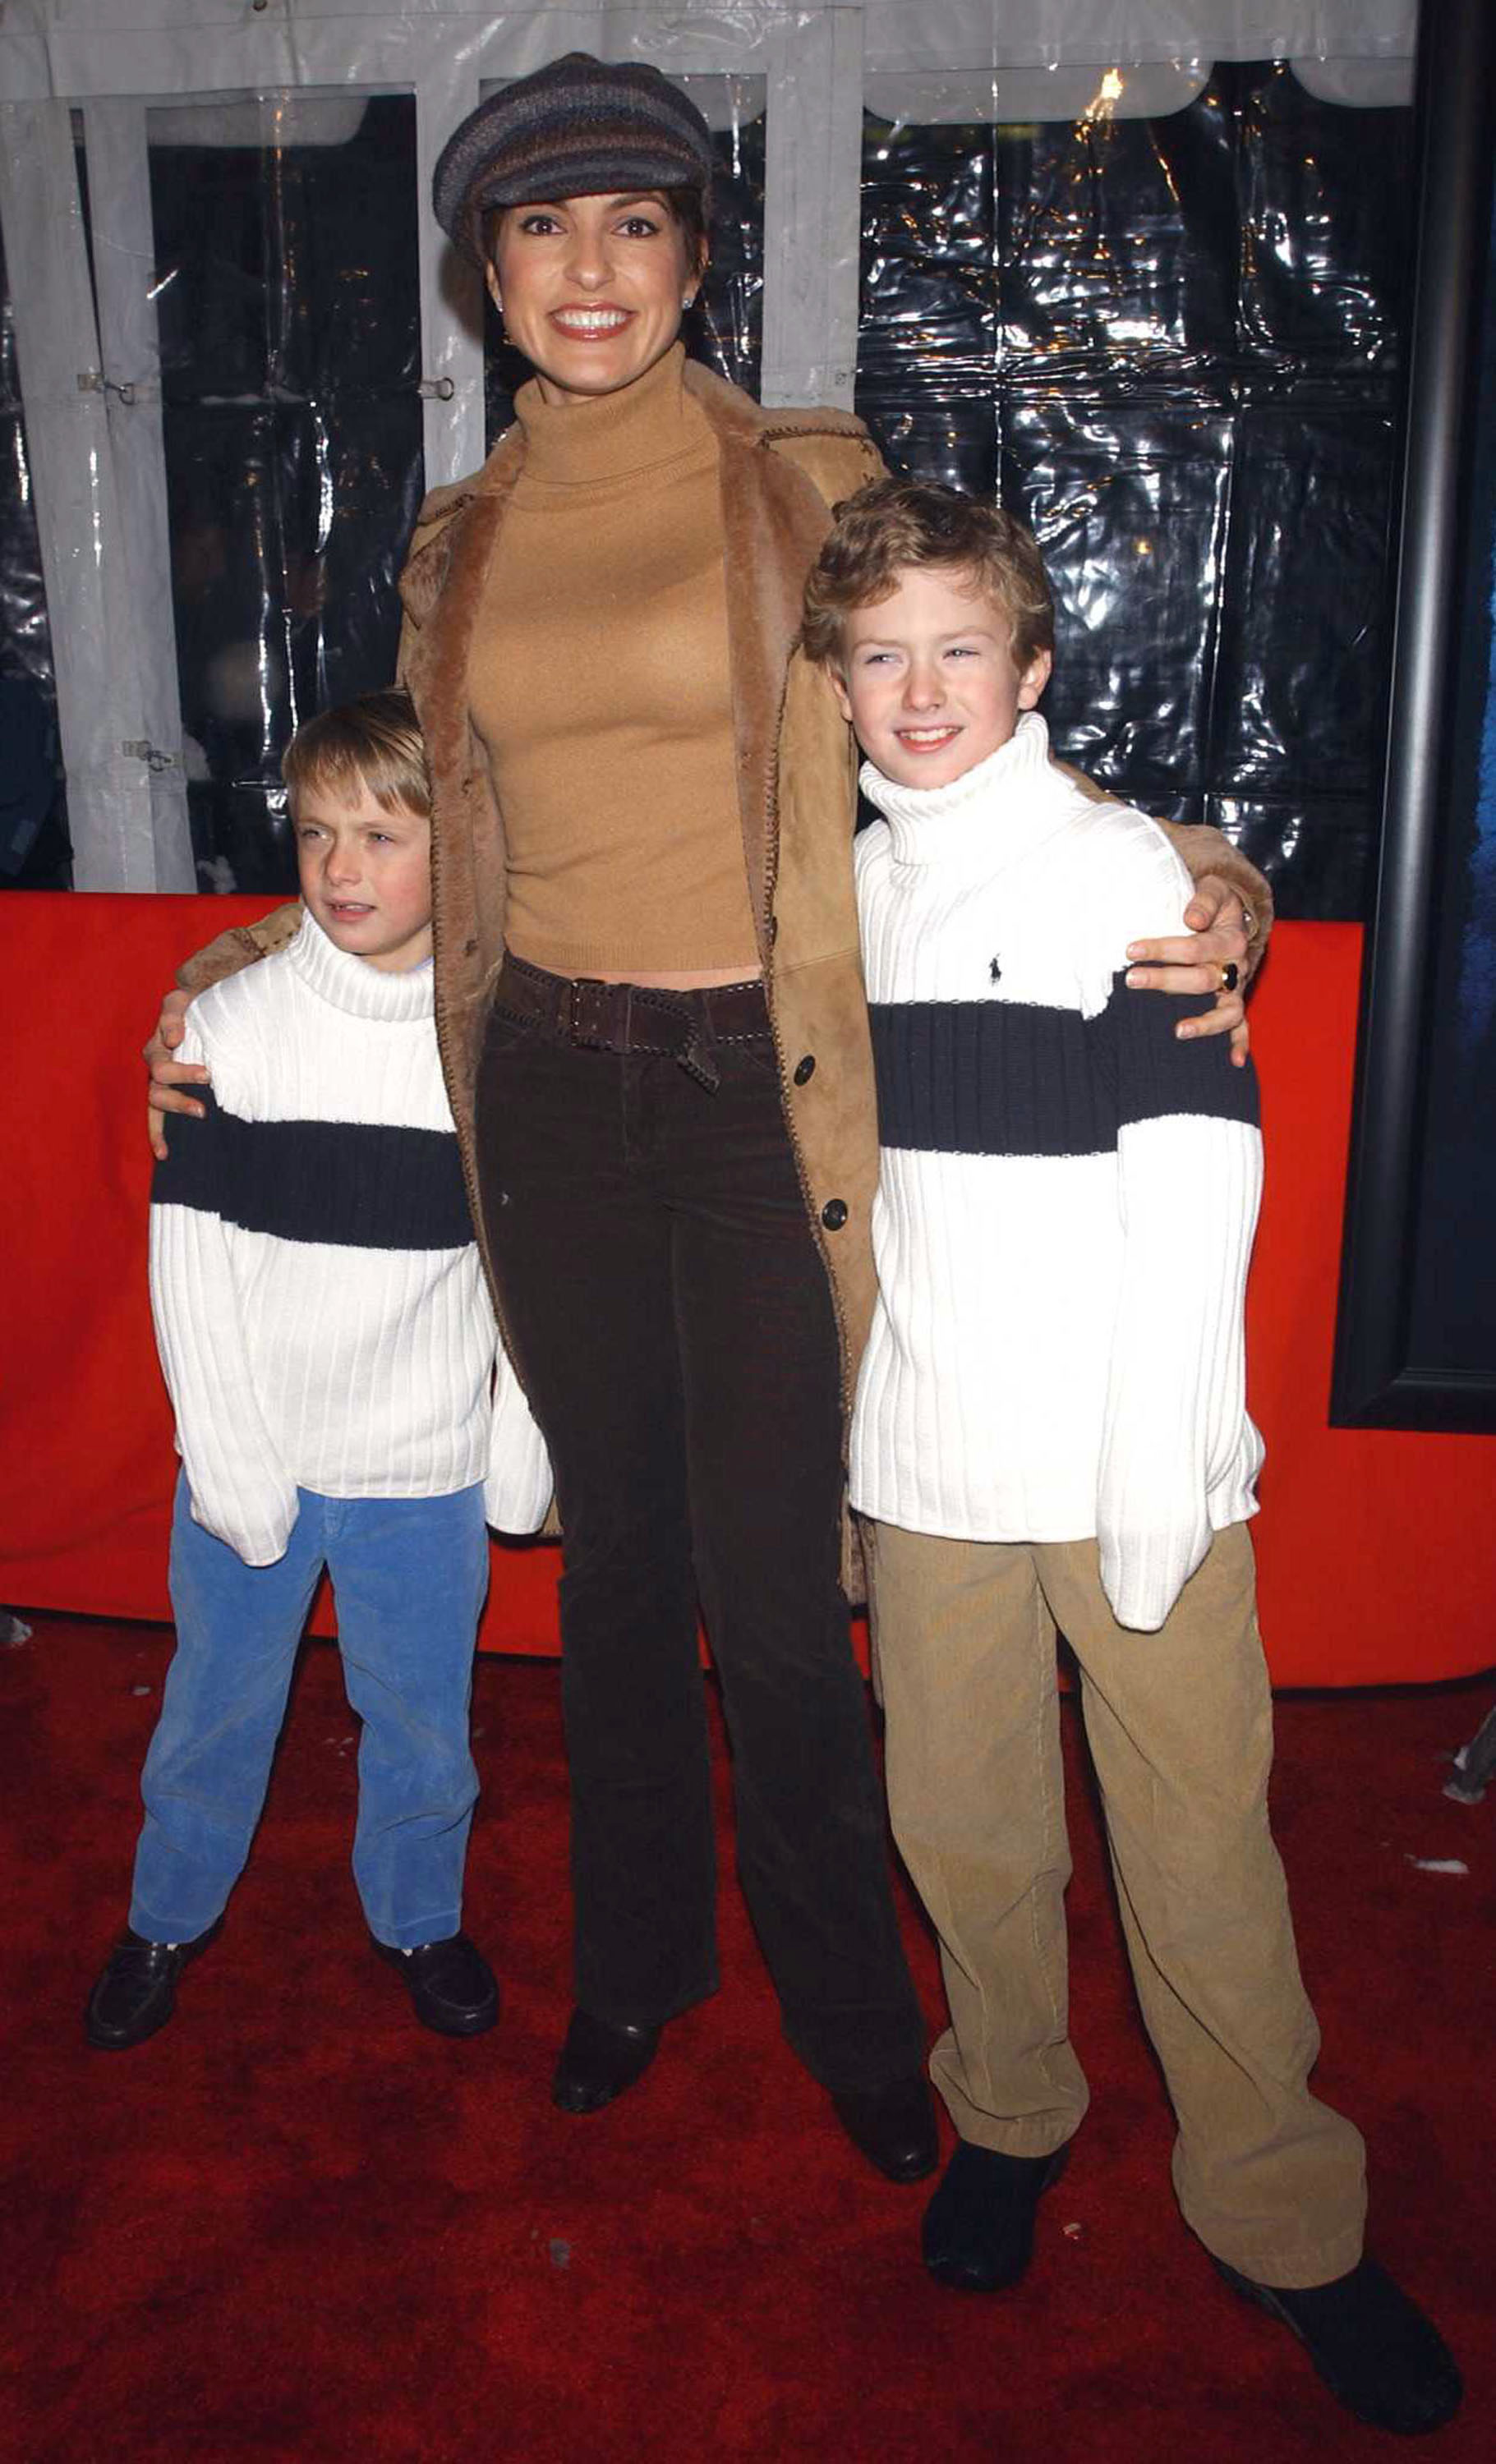 Mariska Hargitay with two unidentified little boys at the "The Lord of the Rings: The Two Towers"  premiere in New York City, 2002 | Source: Getty Images